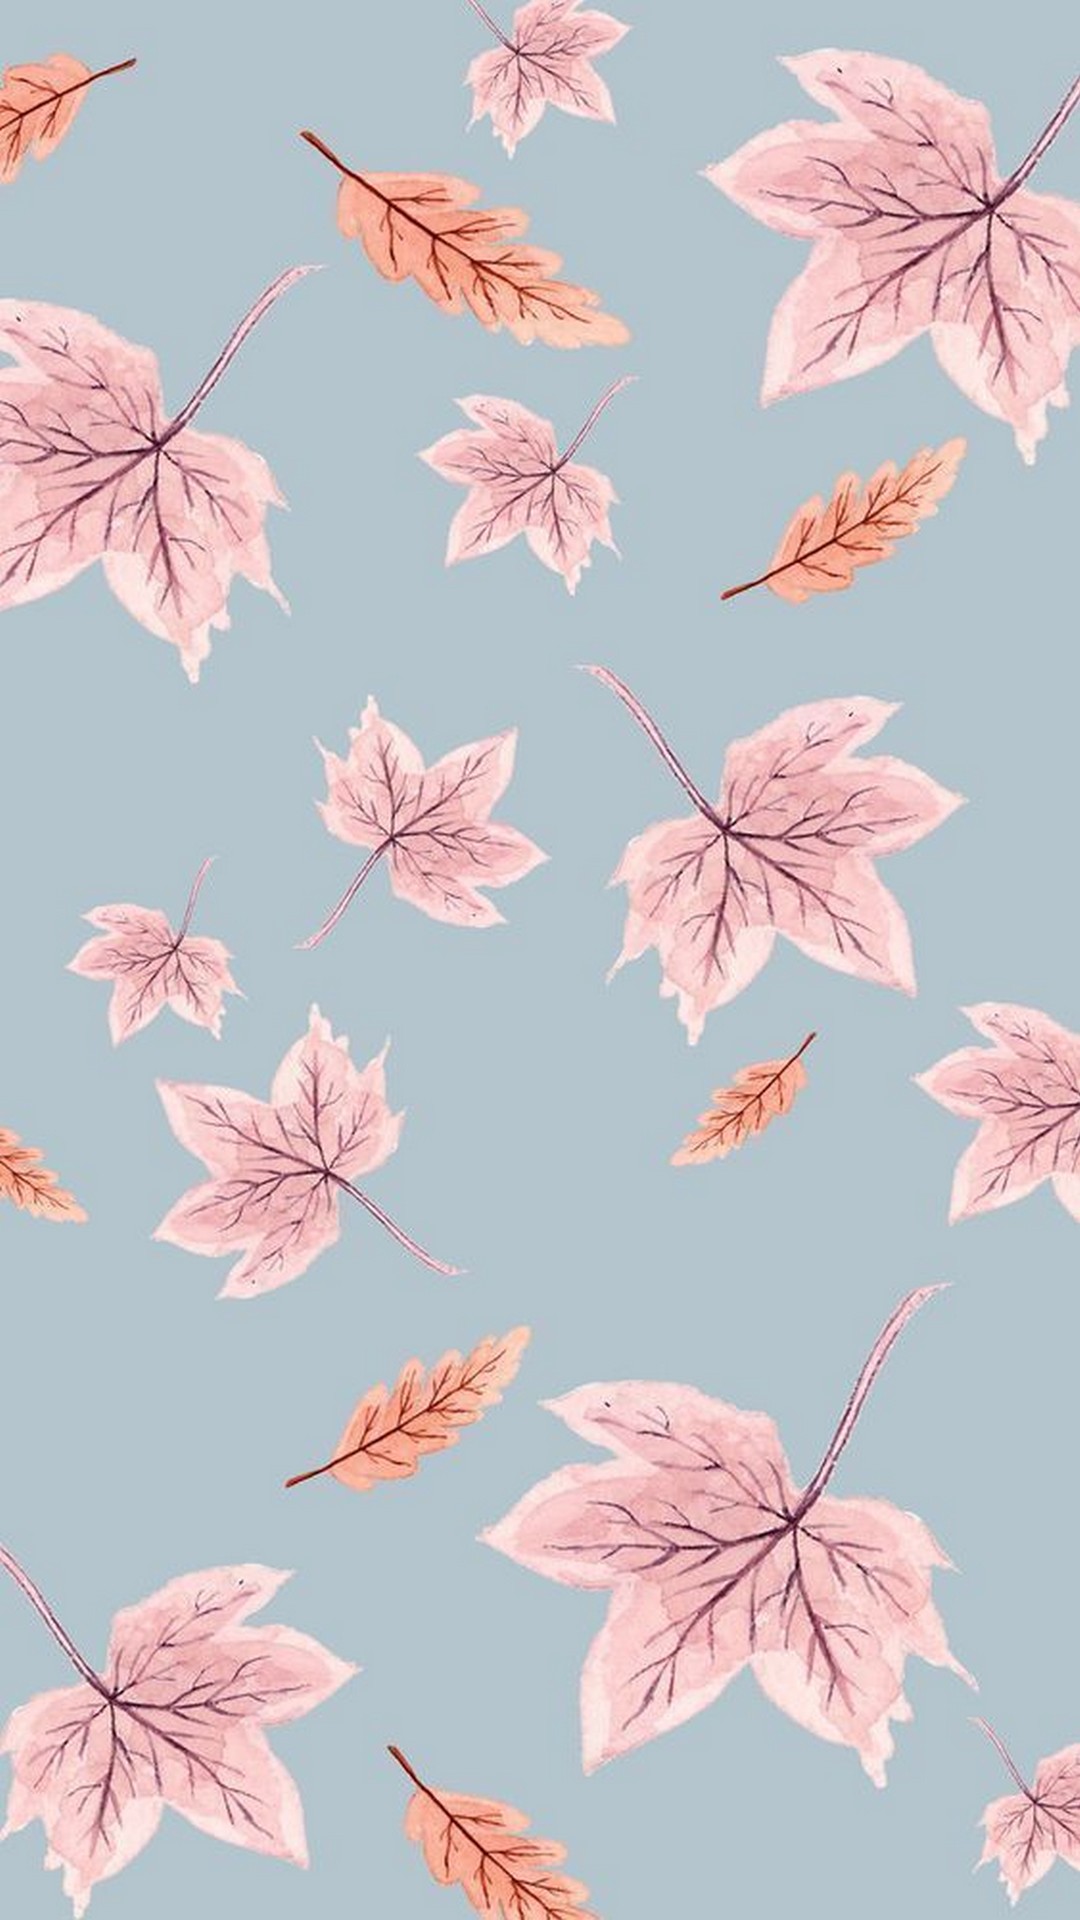 Cute Fall Wallpaper For Mobile with high-resolution 1080x1920 pixel. You can use and set as wallpaper for Notebook Screensavers, Mac Wallpapers, Mobile Home Screen, iPhone or Android Phones Lock Screen